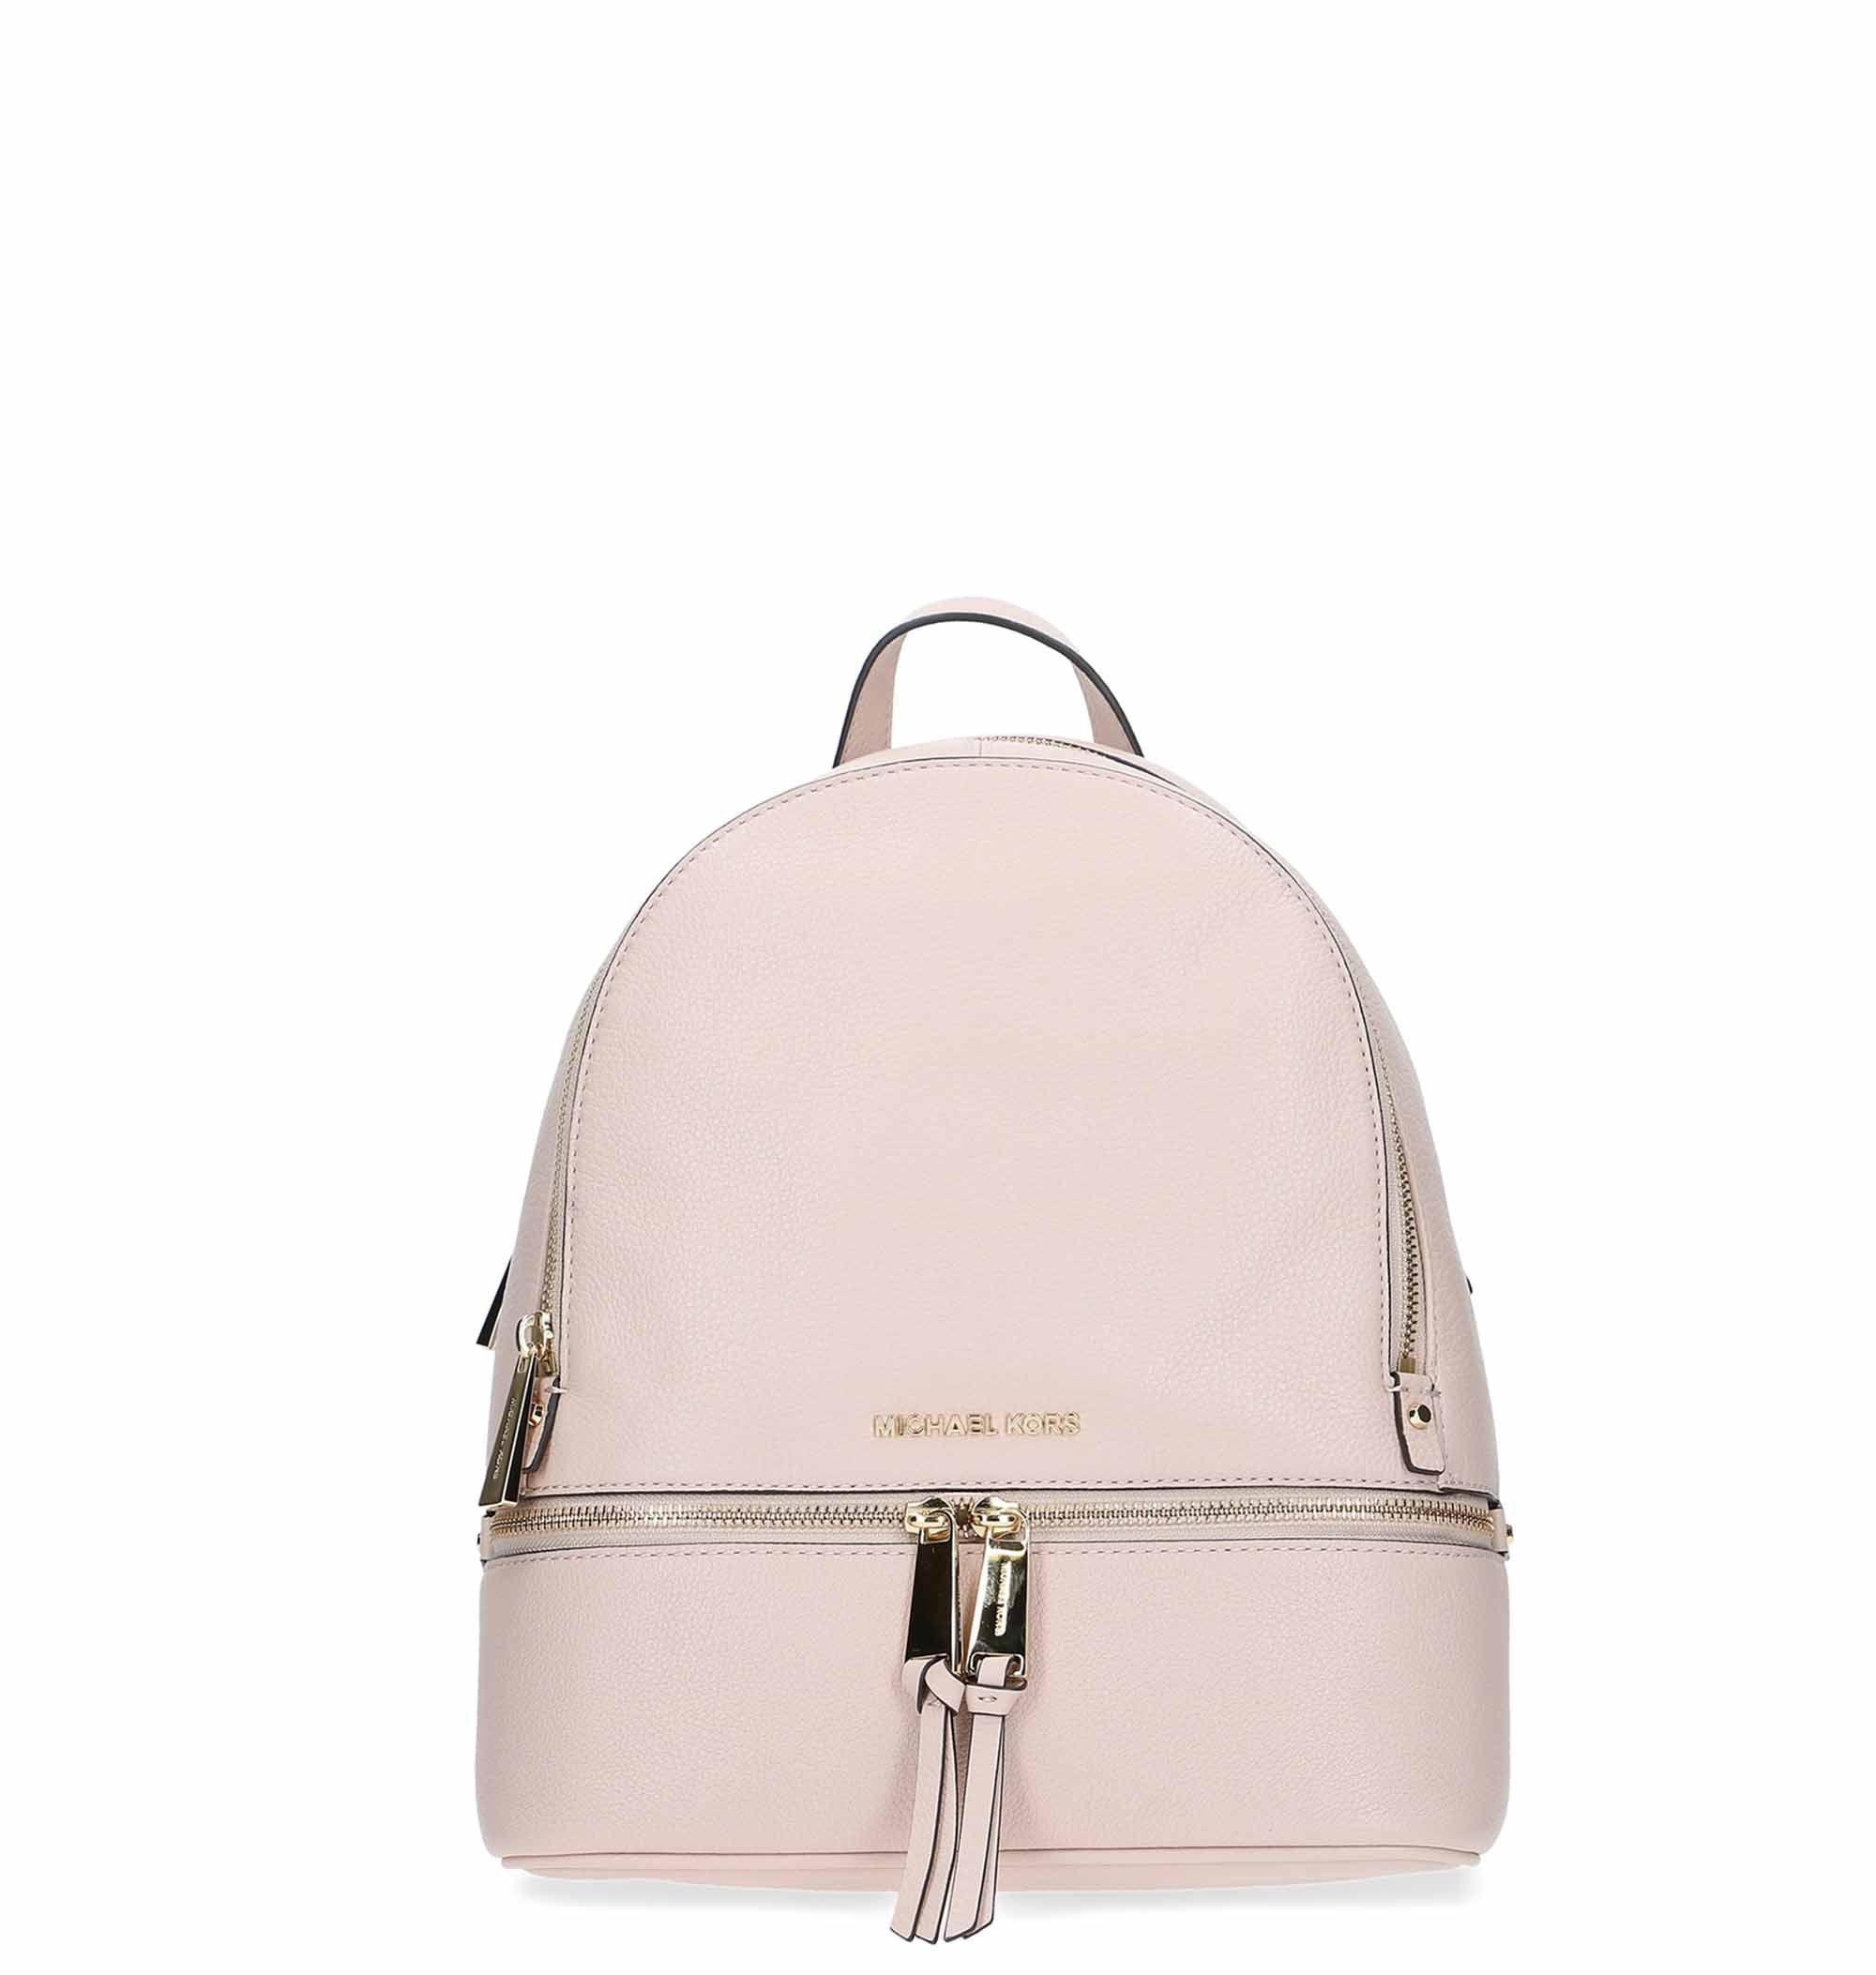 Michael Kors Pink Leather Backpack in Pink - Lyst